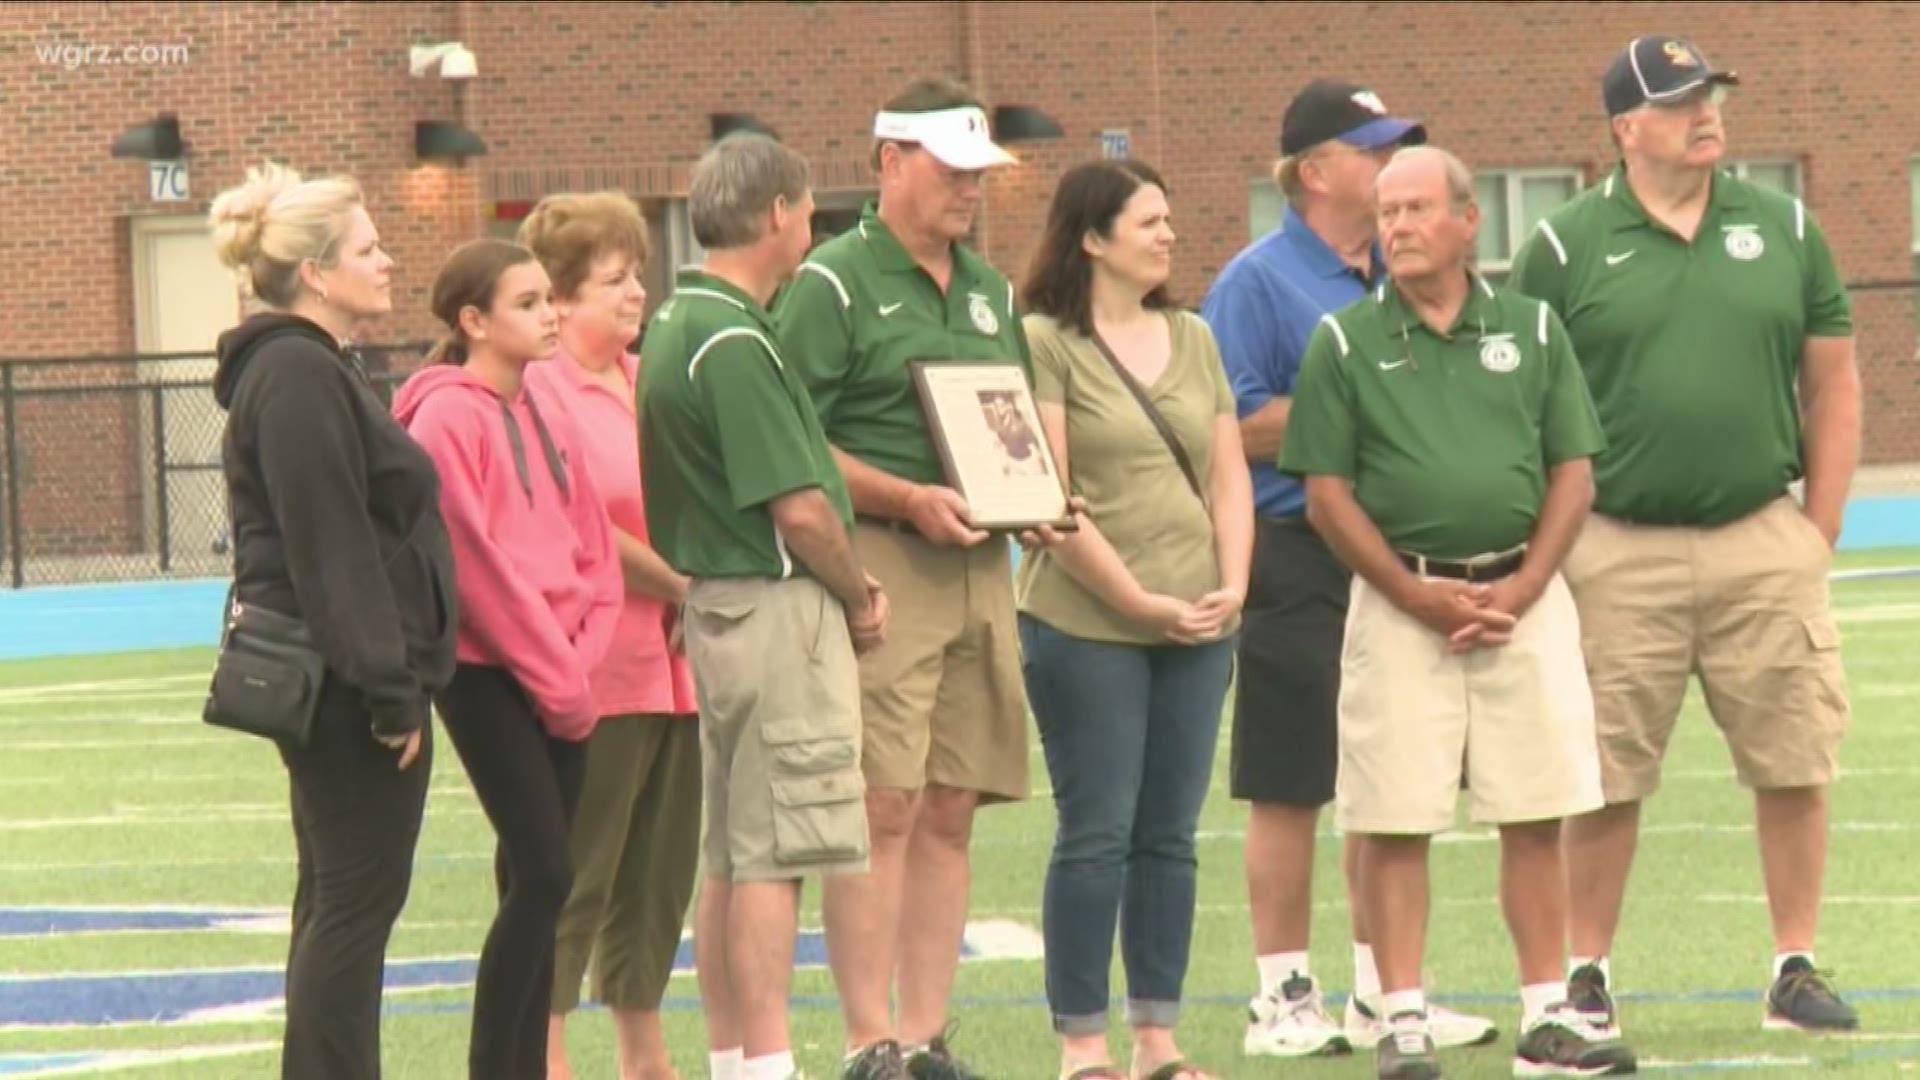 Legendary High school Coach John Faller passes away. He coached Football and Lacrosse at Sweet Home High school.